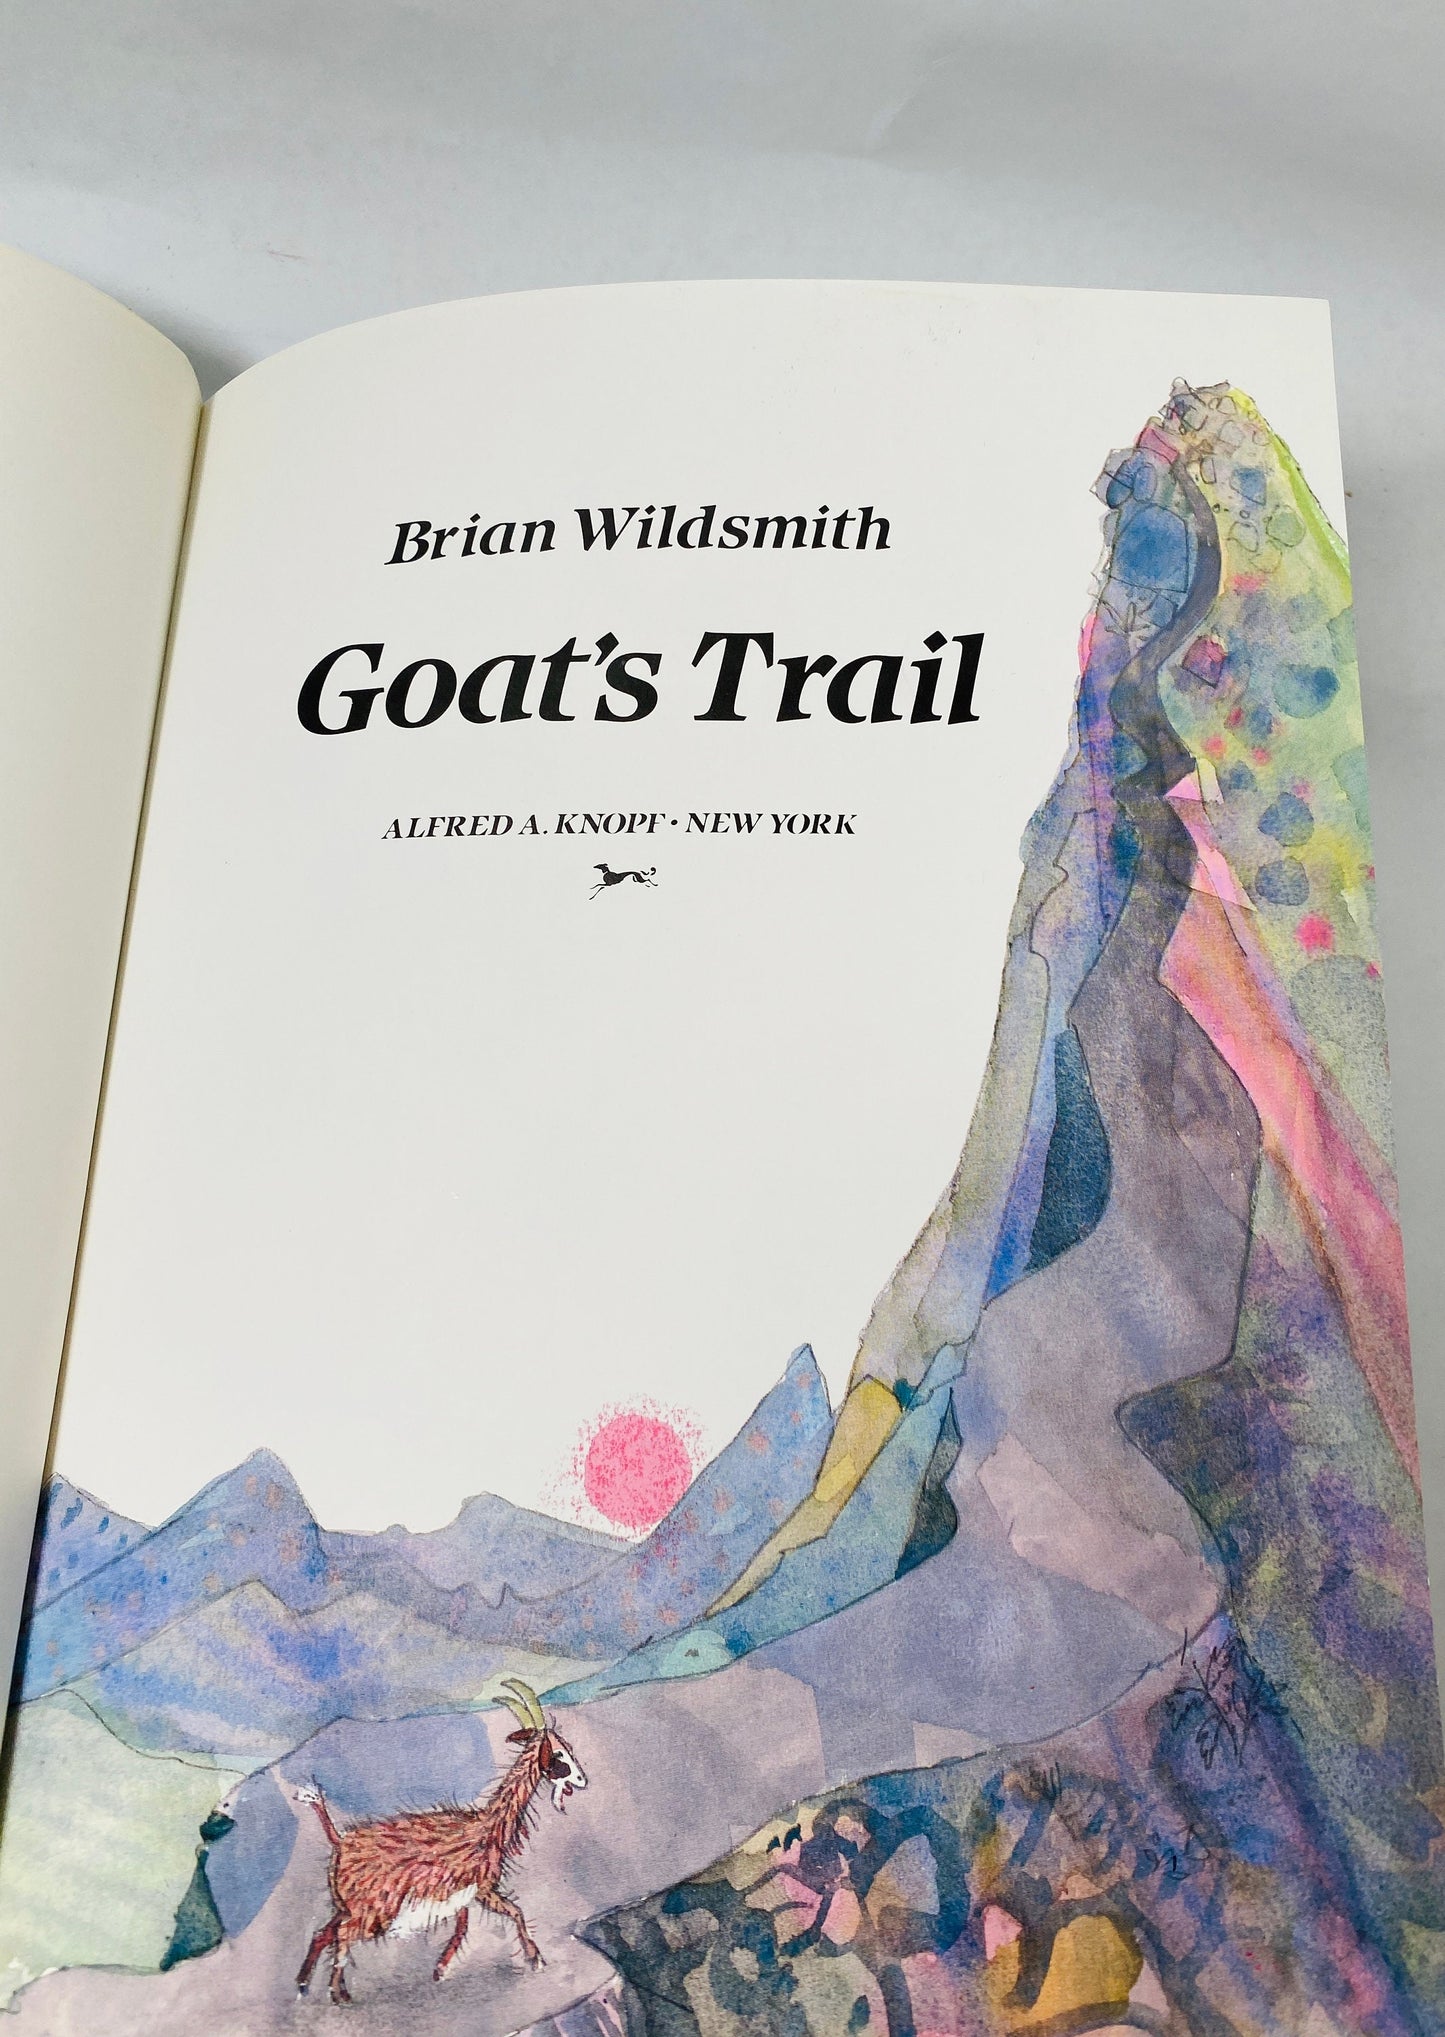 Goat's Trail FIRST EDITION vintage children's book circa 1986 by Brian Wildsmith Nursery decor mother & baby gift Christmas stocking stuffer